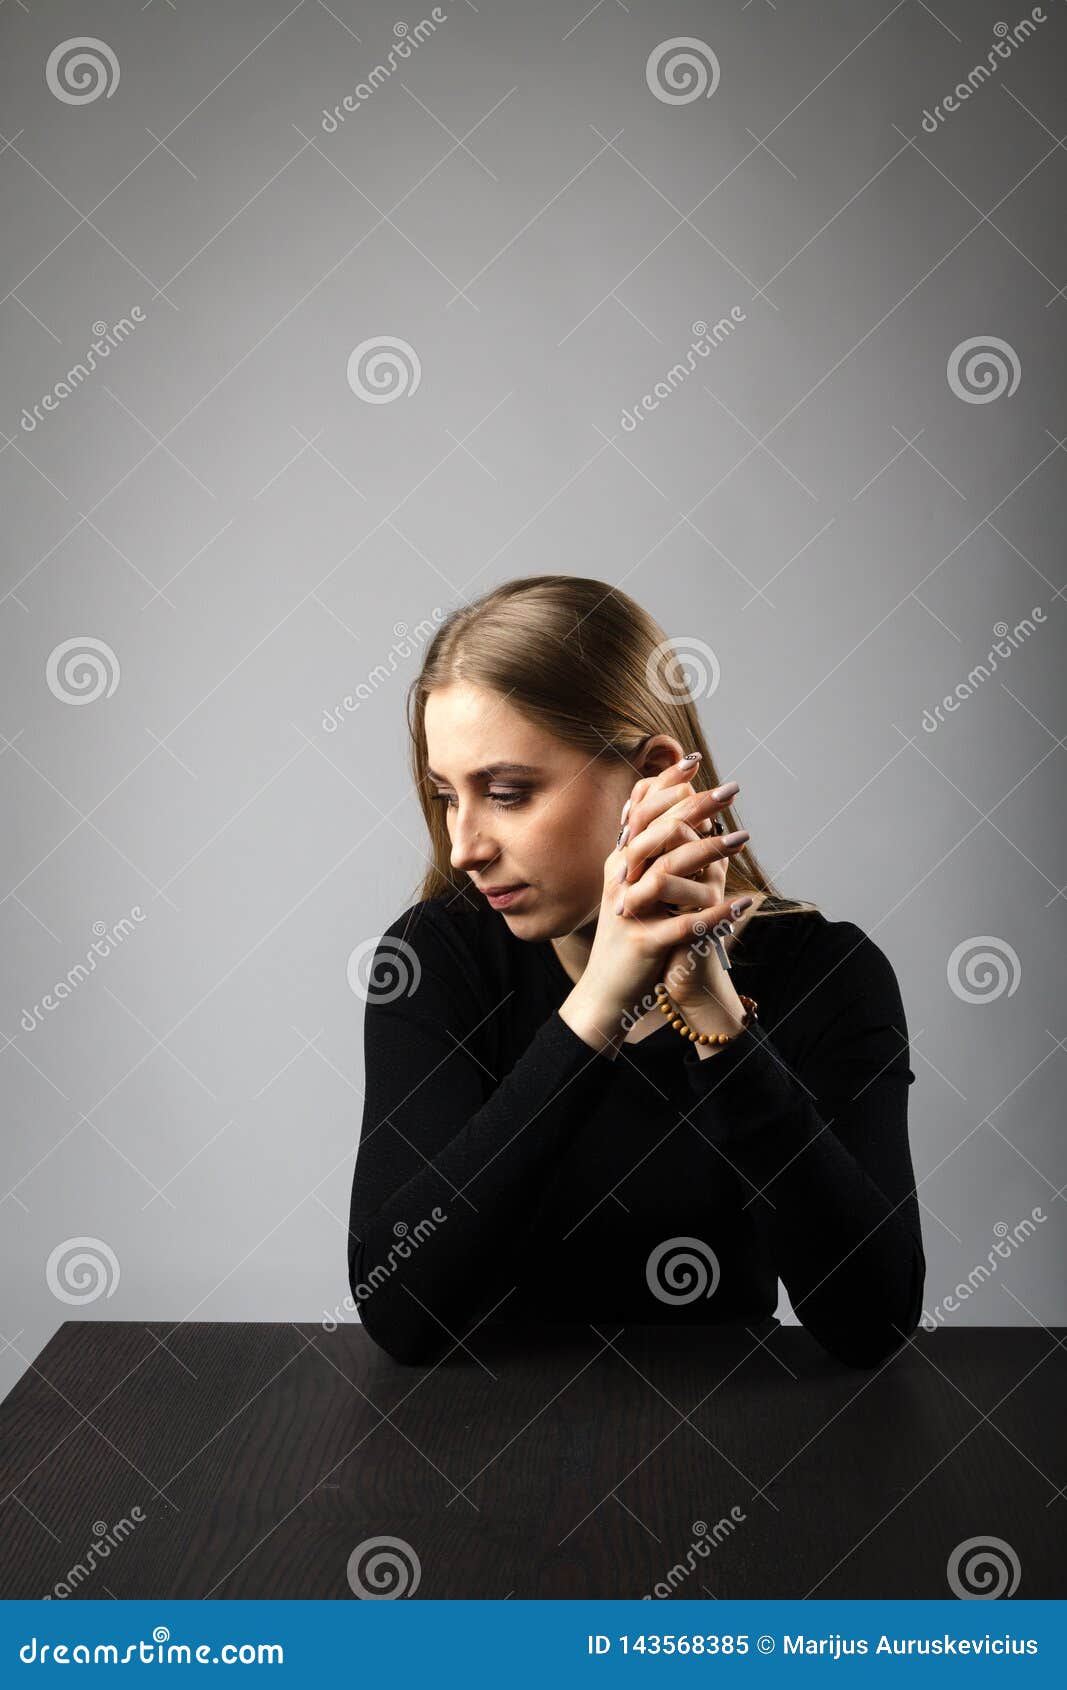 Young Woman is Praying with Rosary Beads Stock Image - Image of pray ...